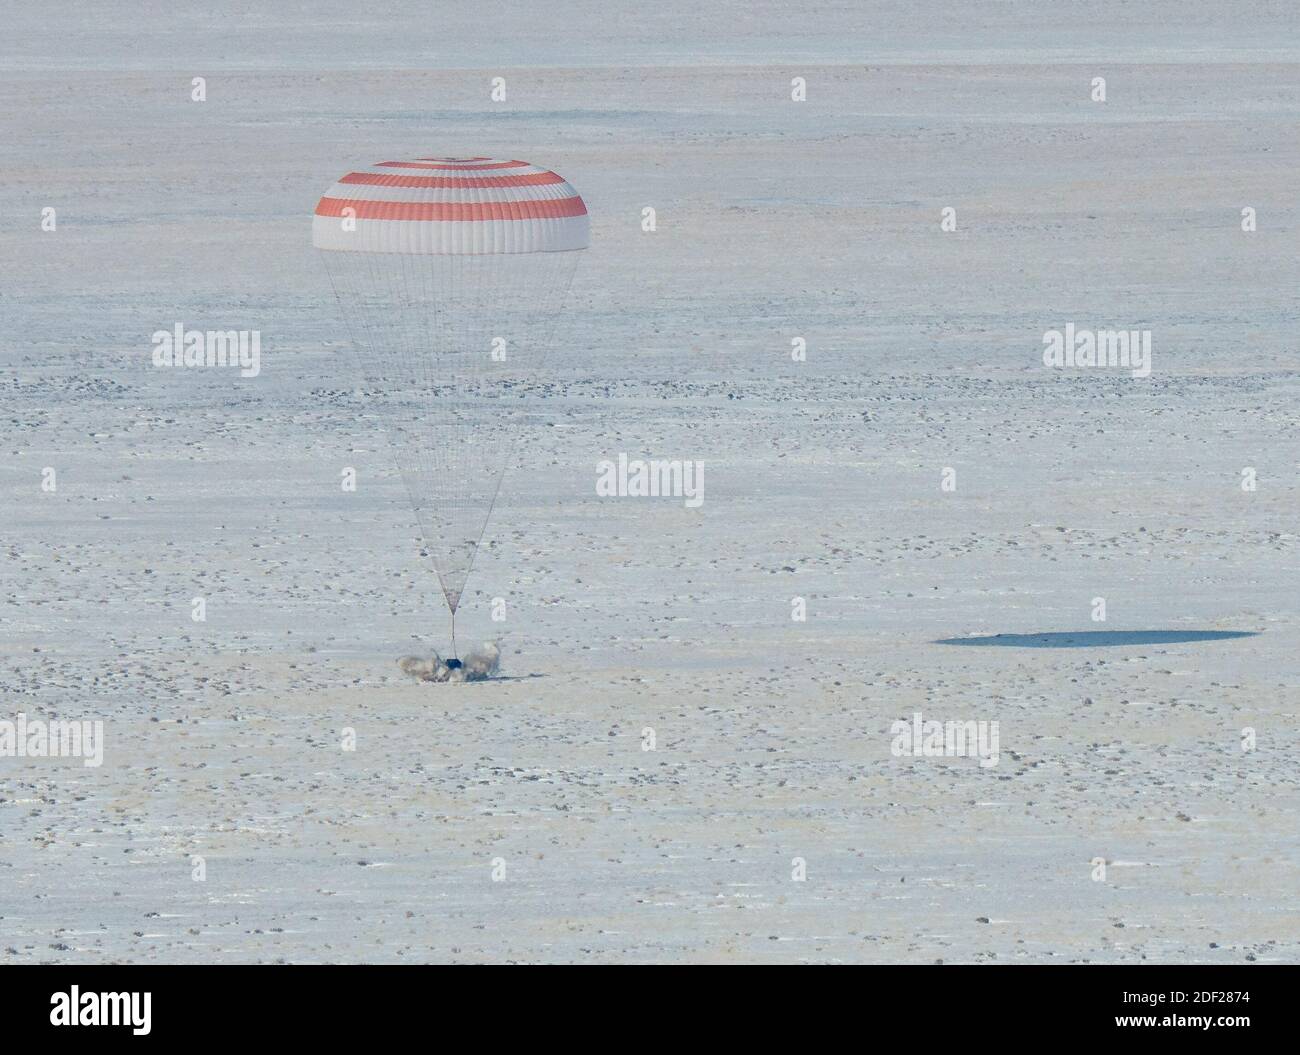 The Soyuz MS-13 spacecraft is seen as it lands in a remote area near the town of Zhezkazgan, Kazakhstan with Expedition 61 crew members Christina Koch of NASA, Alexander Skvortsov of the Russian space agency Roscosmos, and Luca Parmitano of ESA (European Space Agency) Thursday, Feb. 6, 2020. Koch returned to Earth after logging 328 days in space --- the longest spaceflight in history by a woman --- as a member of Expeditions 59-60-61 on the International Space Station. Skvortsov and Parmitano returned after 201 days in space where they served as Expedition 60-61 crew members onboard the statio Stock Photo